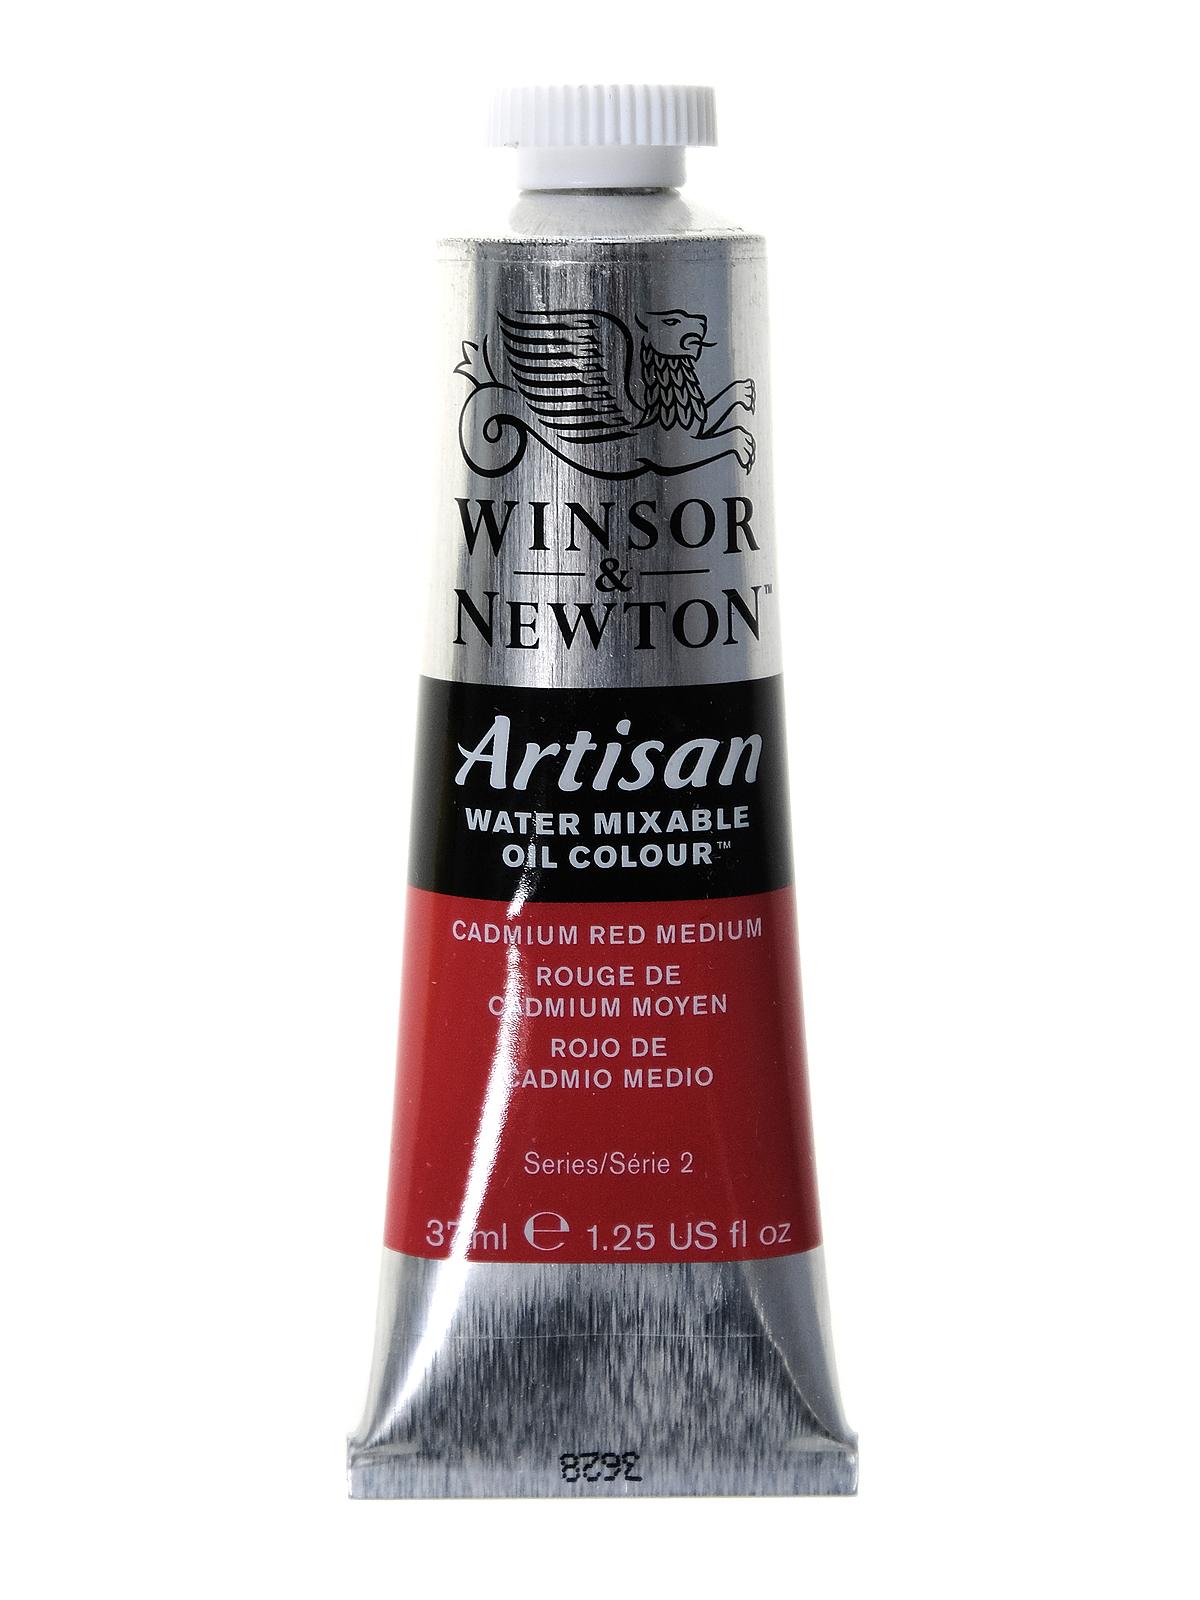 Artisan Water Mixable Oil Colours Cadmium Red Medium 37 Ml 99